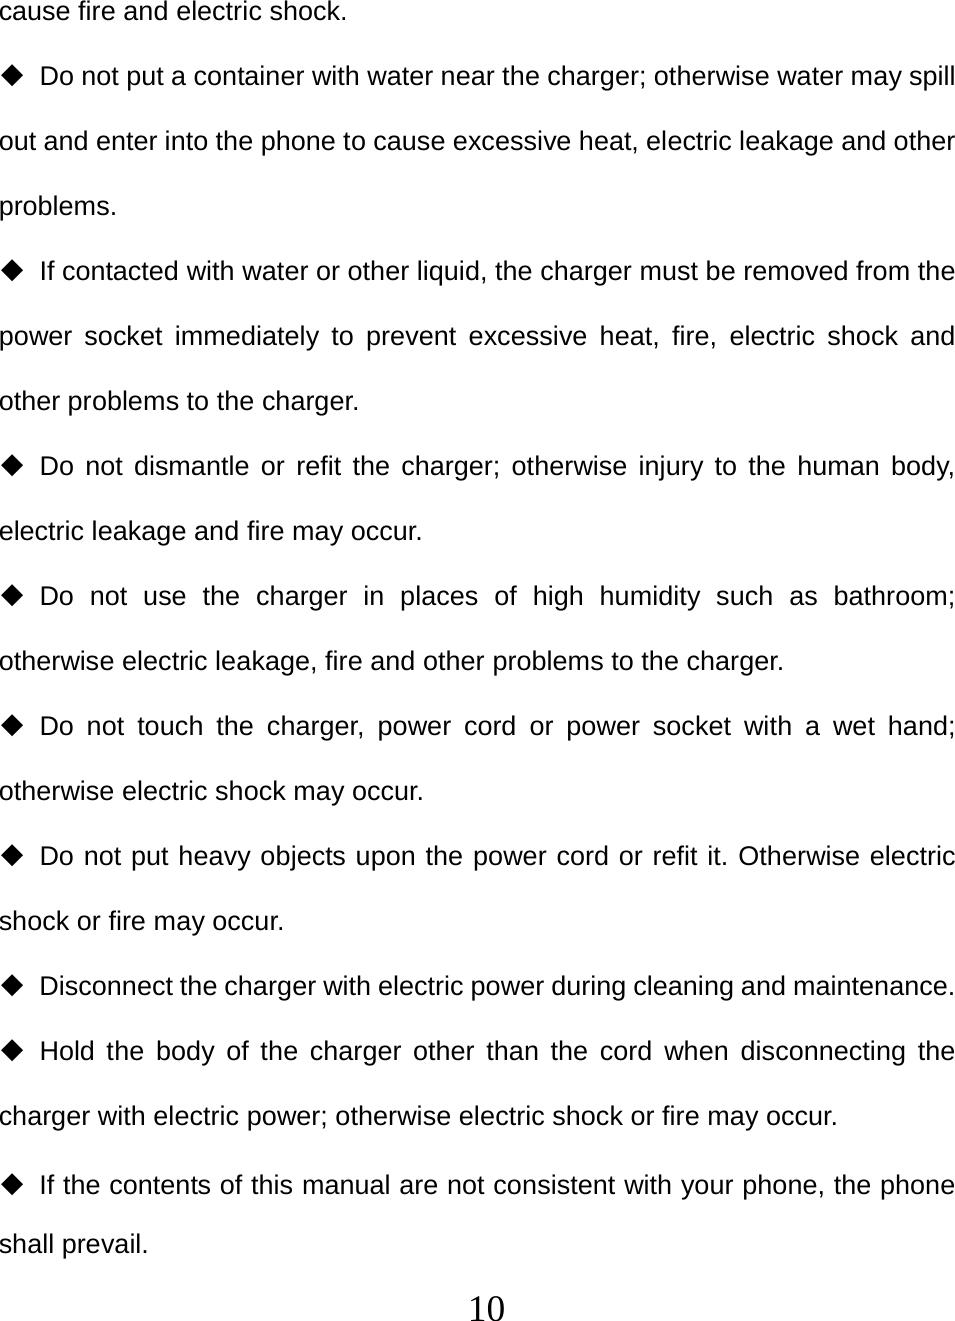   10cause fire and electric shock.   Do not put a container with water near the charger; otherwise water may spill out and enter into the phone to cause excessive heat, electric leakage and other problems.   If contacted with water or other liquid, the charger must be removed from the power socket immediately to prevent excessive heat, fire, electric shock and other problems to the charger.  Do not dismantle or refit the charger; otherwise injury to the human body, electric leakage and fire may occur.  Do not use the charger in places of high humidity such as bathroom; otherwise electric leakage, fire and other problems to the charger.  Do not touch the charger, power cord or power socket with a wet hand; otherwise electric shock may occur.   Do not put heavy objects upon the power cord or refit it. Otherwise electric shock or fire may occur.   Disconnect the charger with electric power during cleaning and maintenance.  Hold the body of the charger other than the cord when disconnecting the charger with electric power; otherwise electric shock or fire may occur.   If the contents of this manual are not consistent with your phone, the phone shall prevail. 